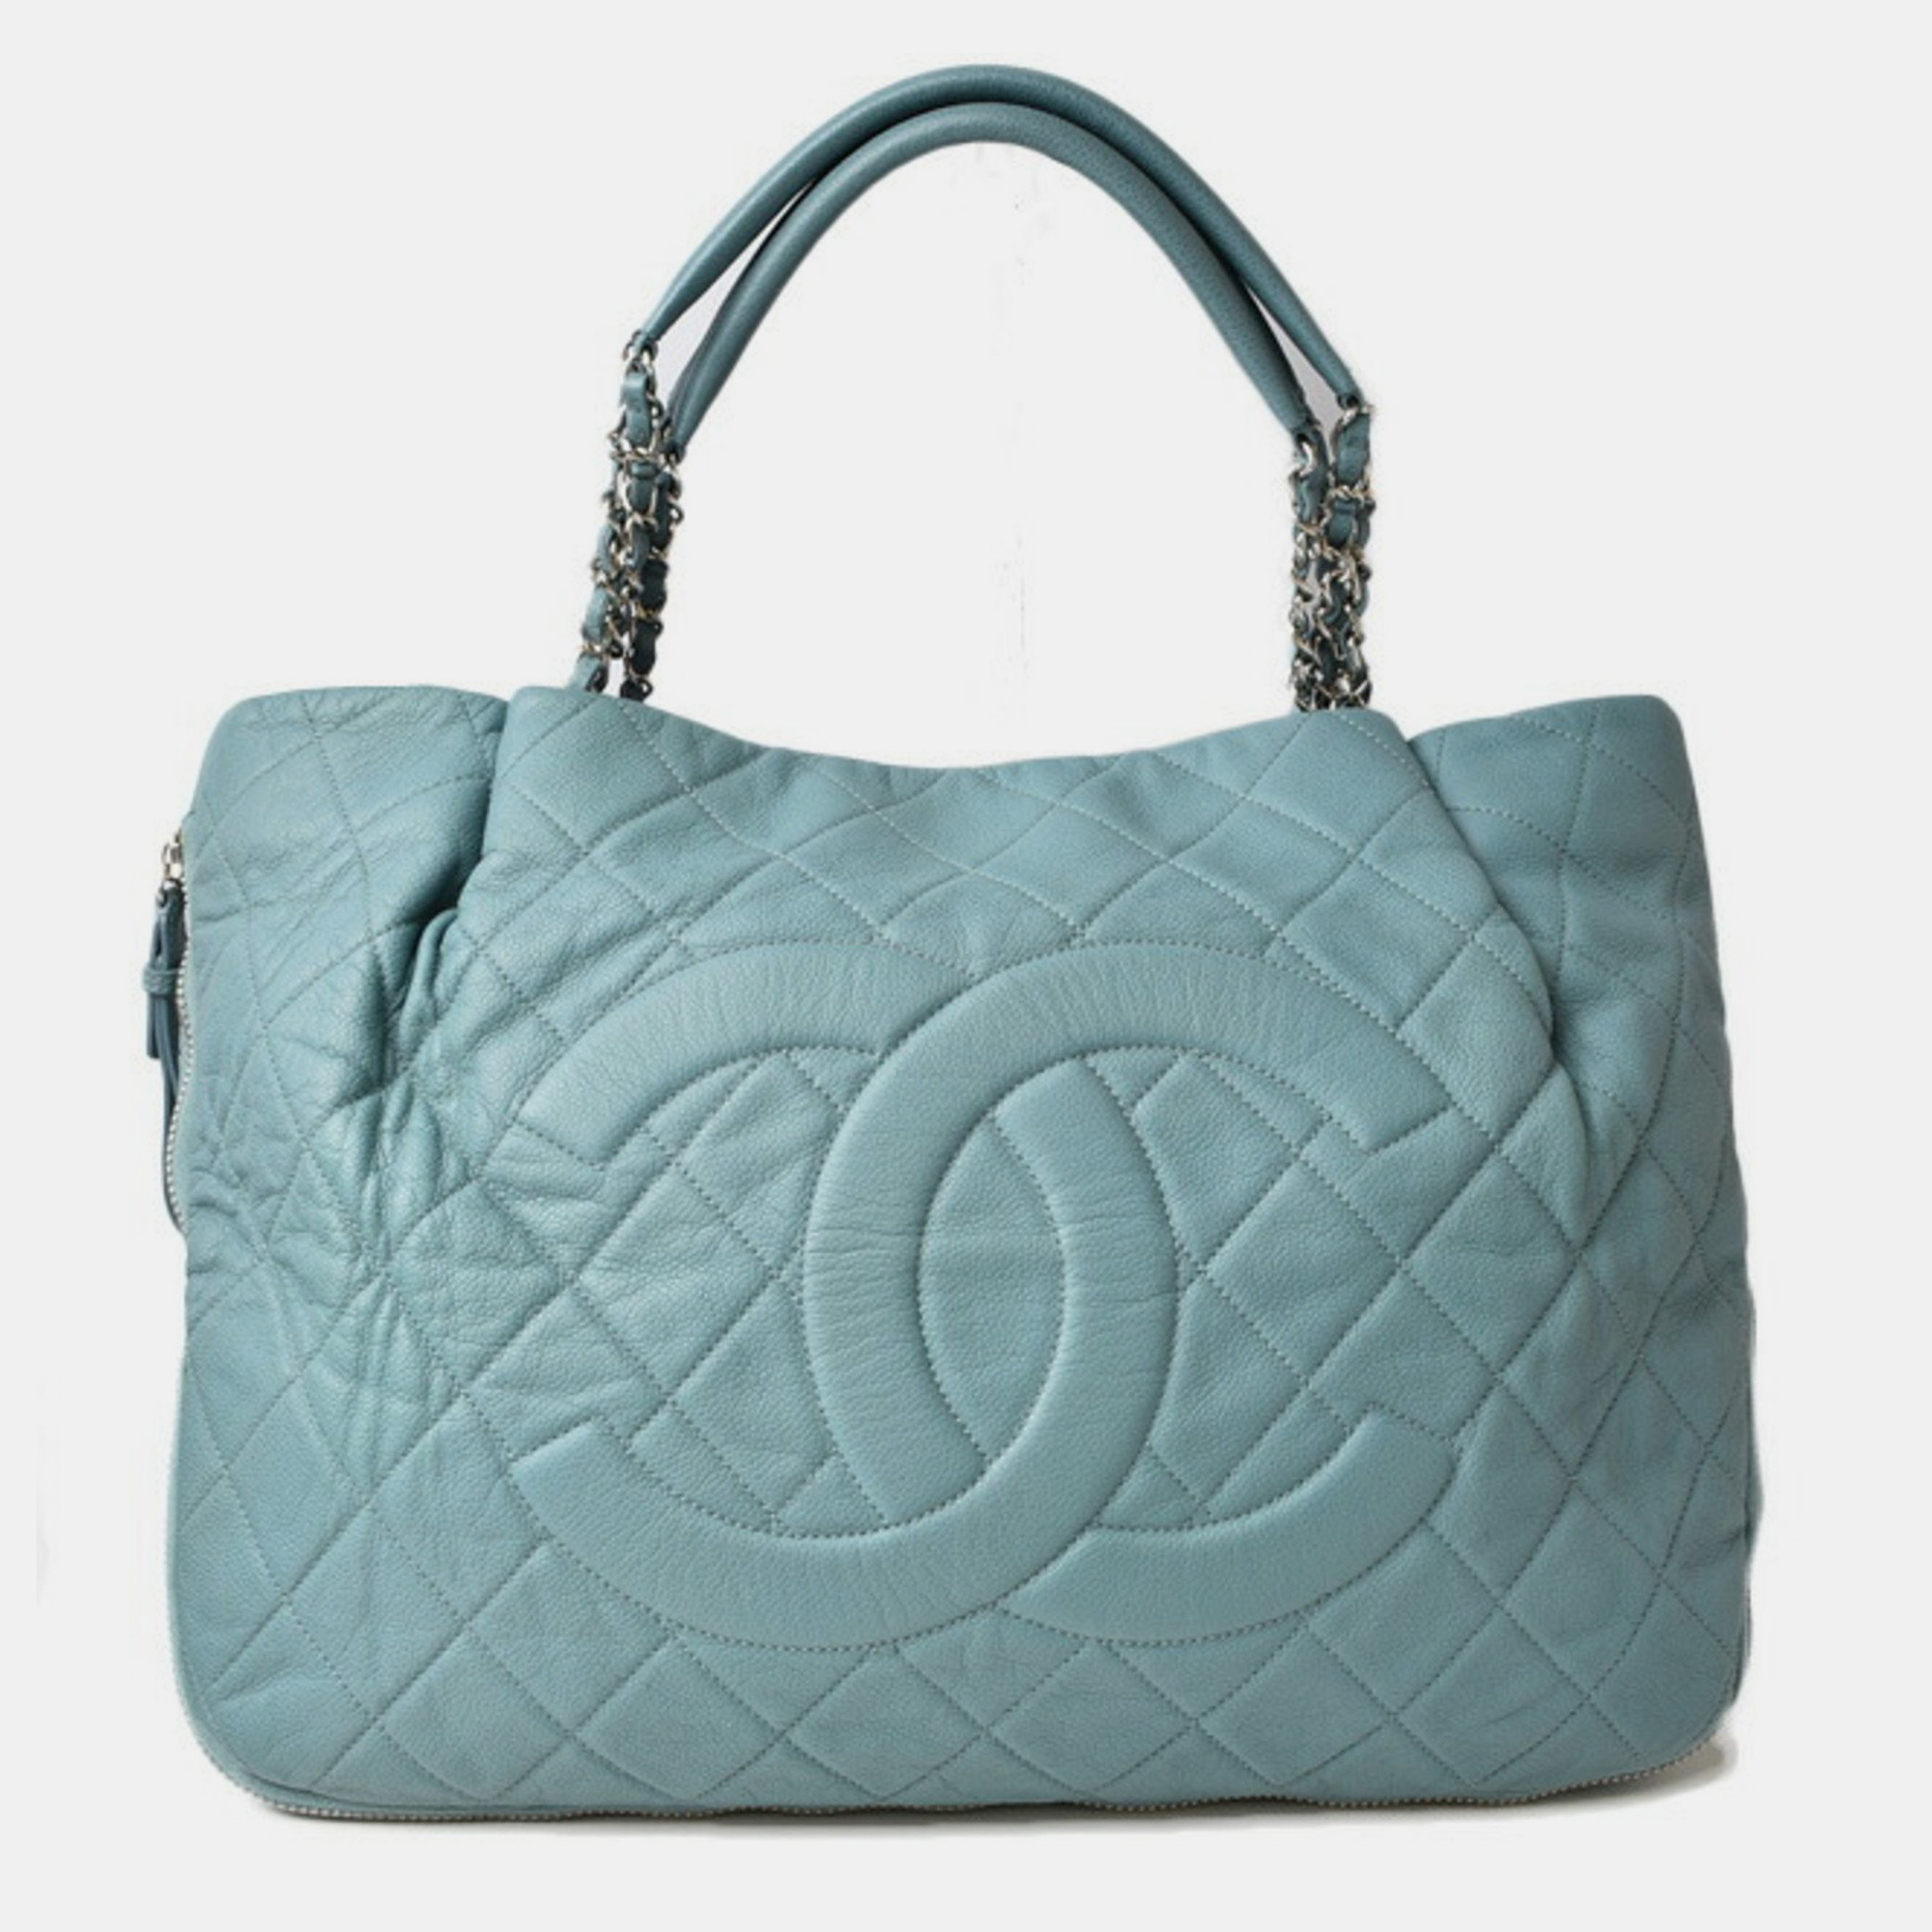 Uncompromising in quality and design this Chanel tote is a must have in any wardrobe. With its durable construction and luxurious finish its the perfect accessory for any occasion.